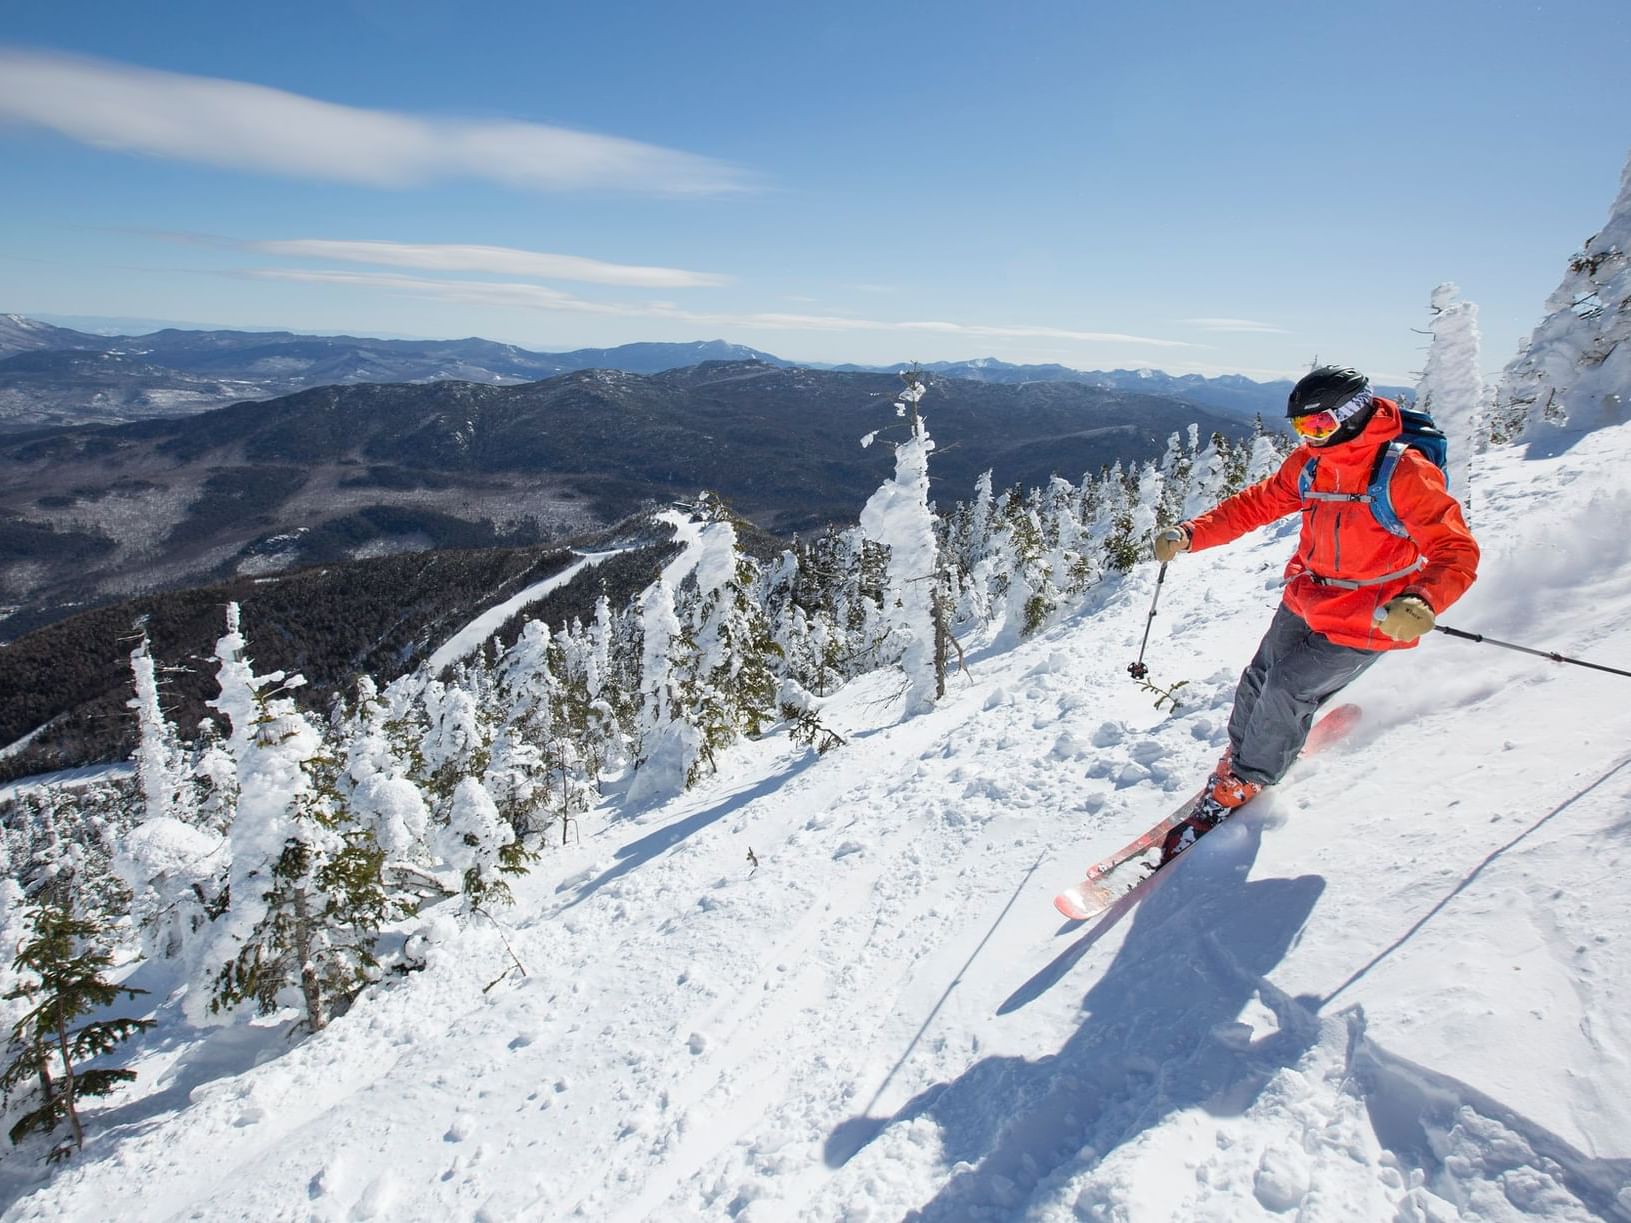 A man skiing on Whiteface mountain near High Peaks Resort